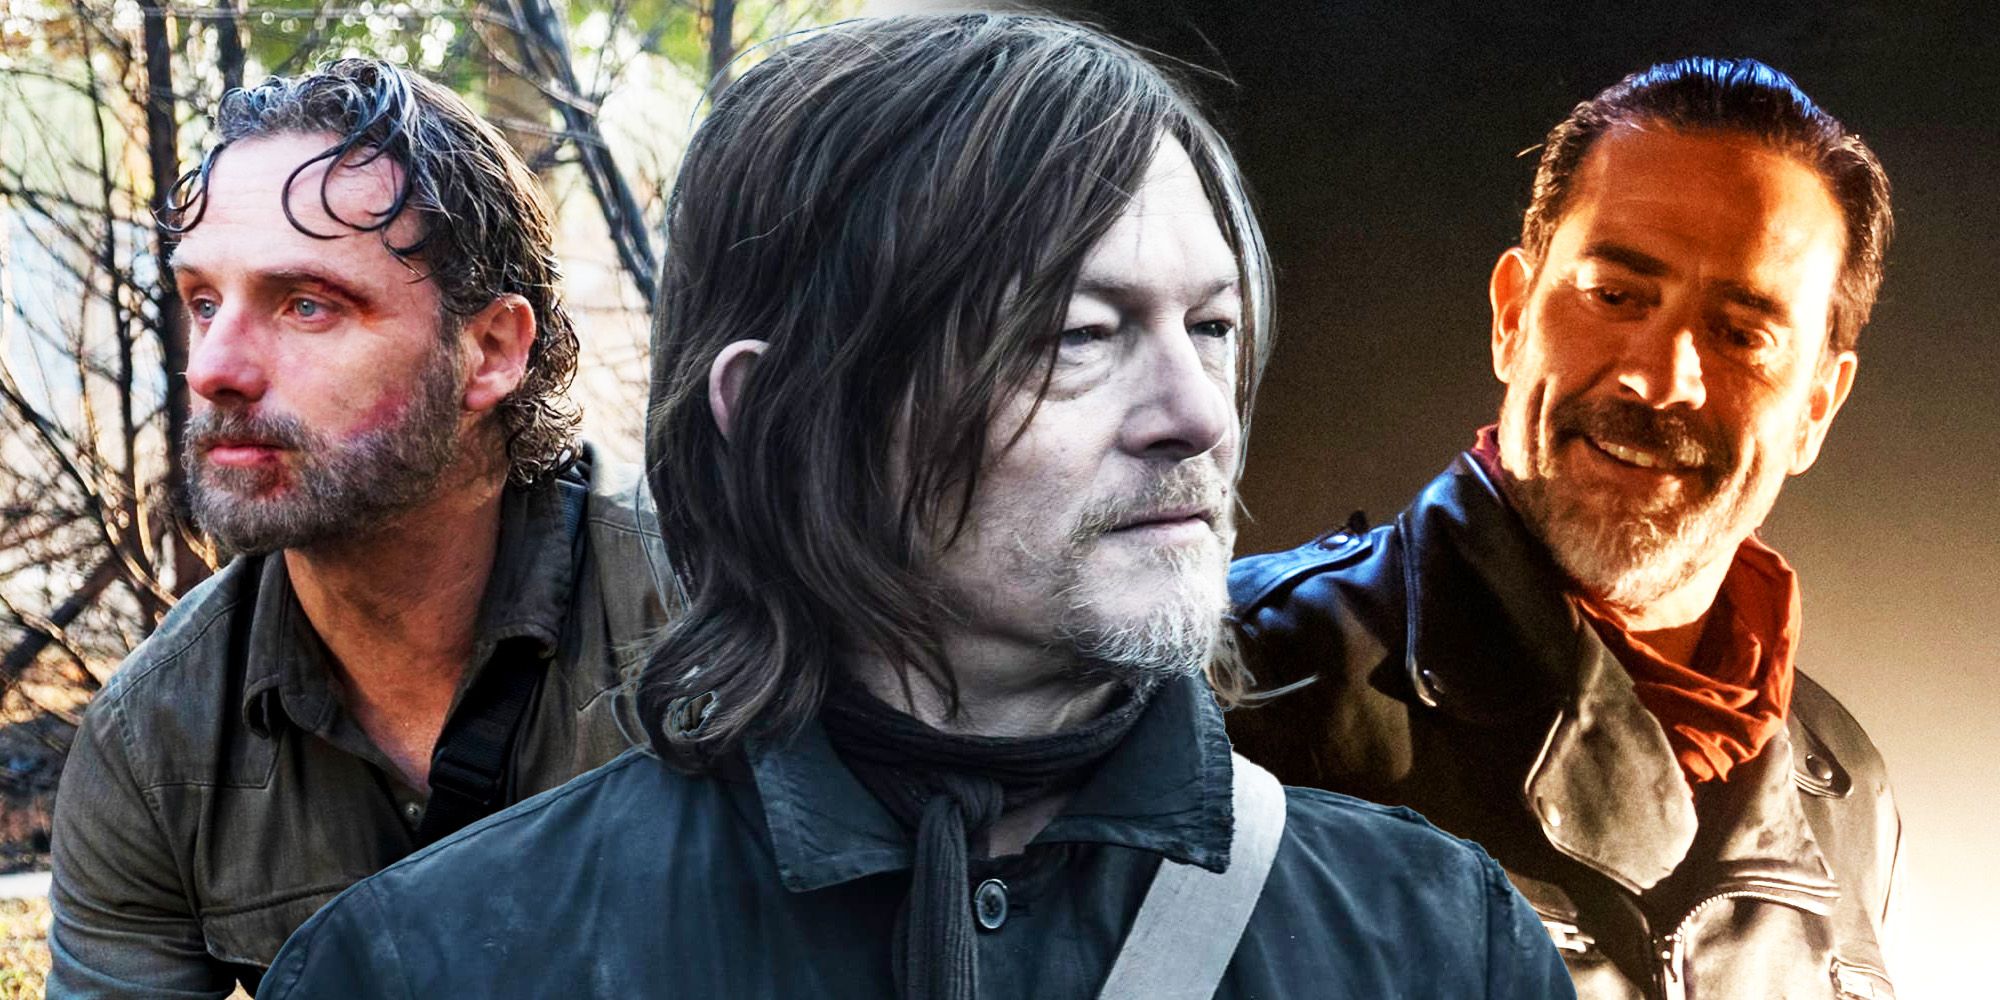 Daryl Dixon in his spinoff show, Rick in The Walking Dead, and Negan in Dead City